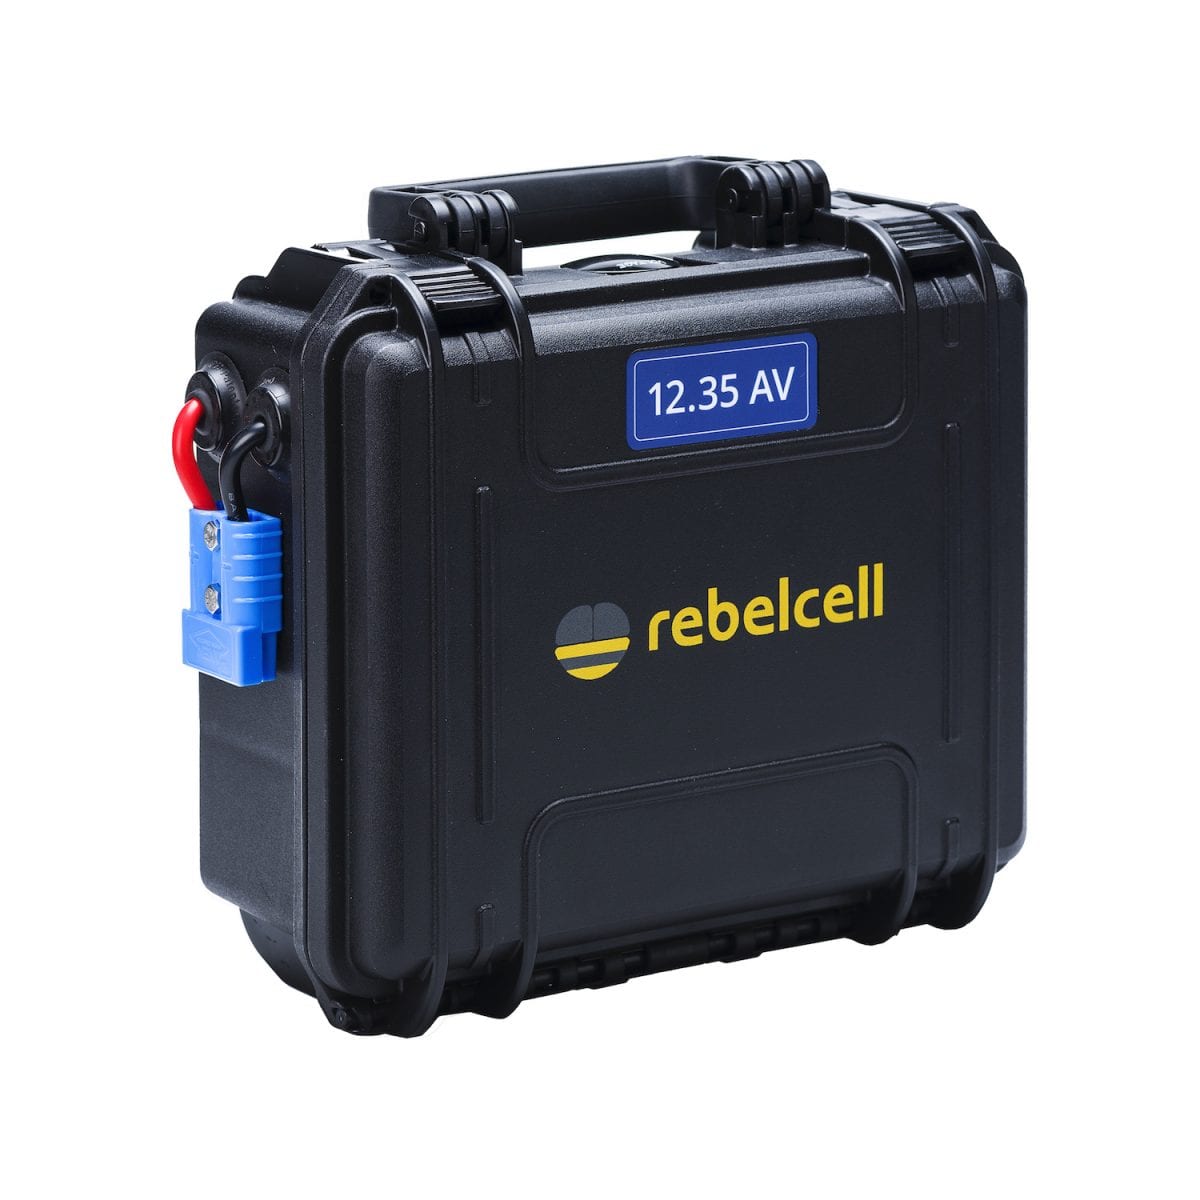 Rebelcell outdoorbox 12.35 product image